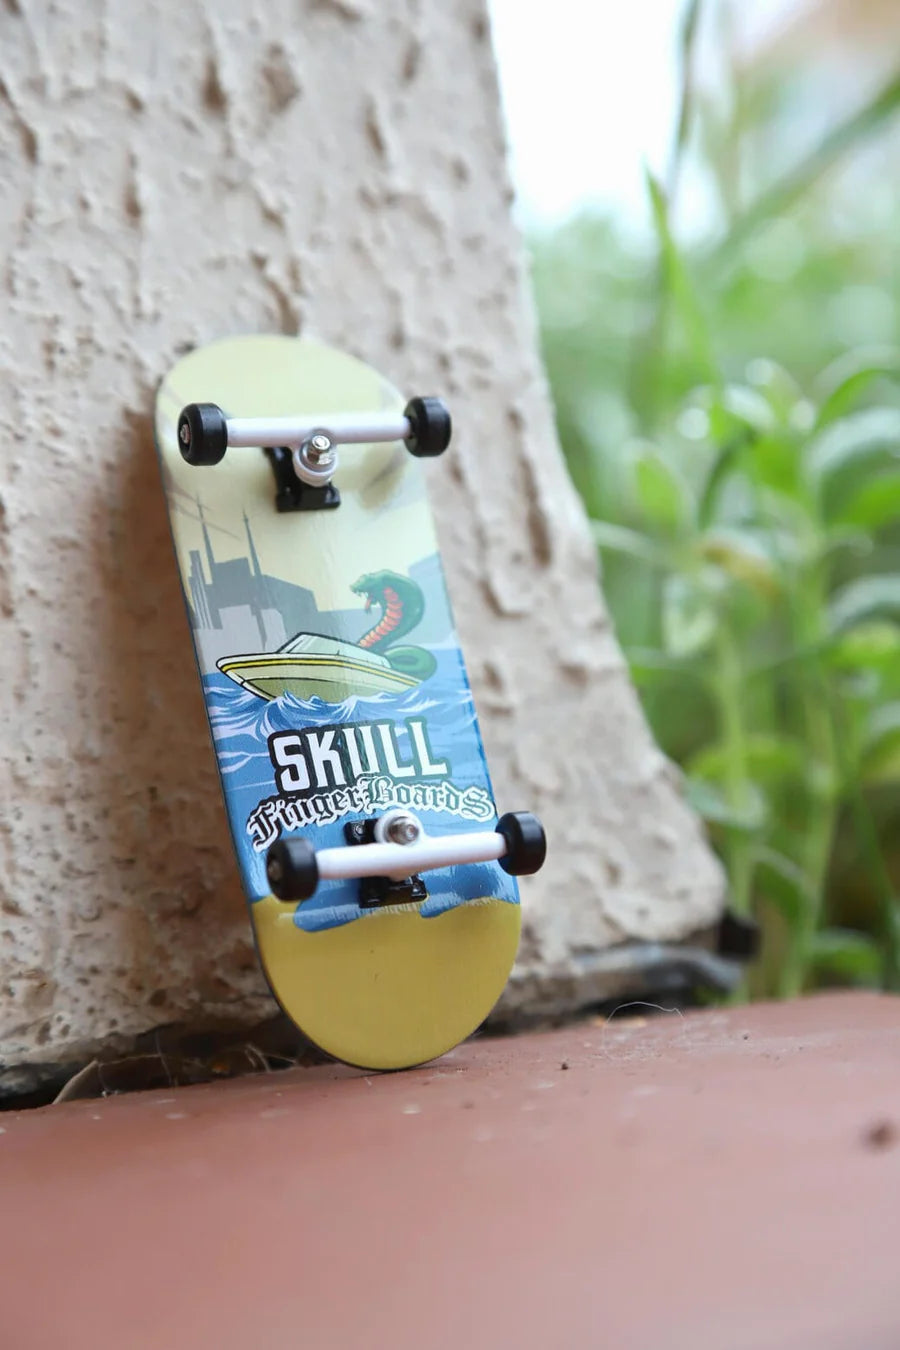 Skull Complete - City Limits 34mm (Pro Truck Edition)